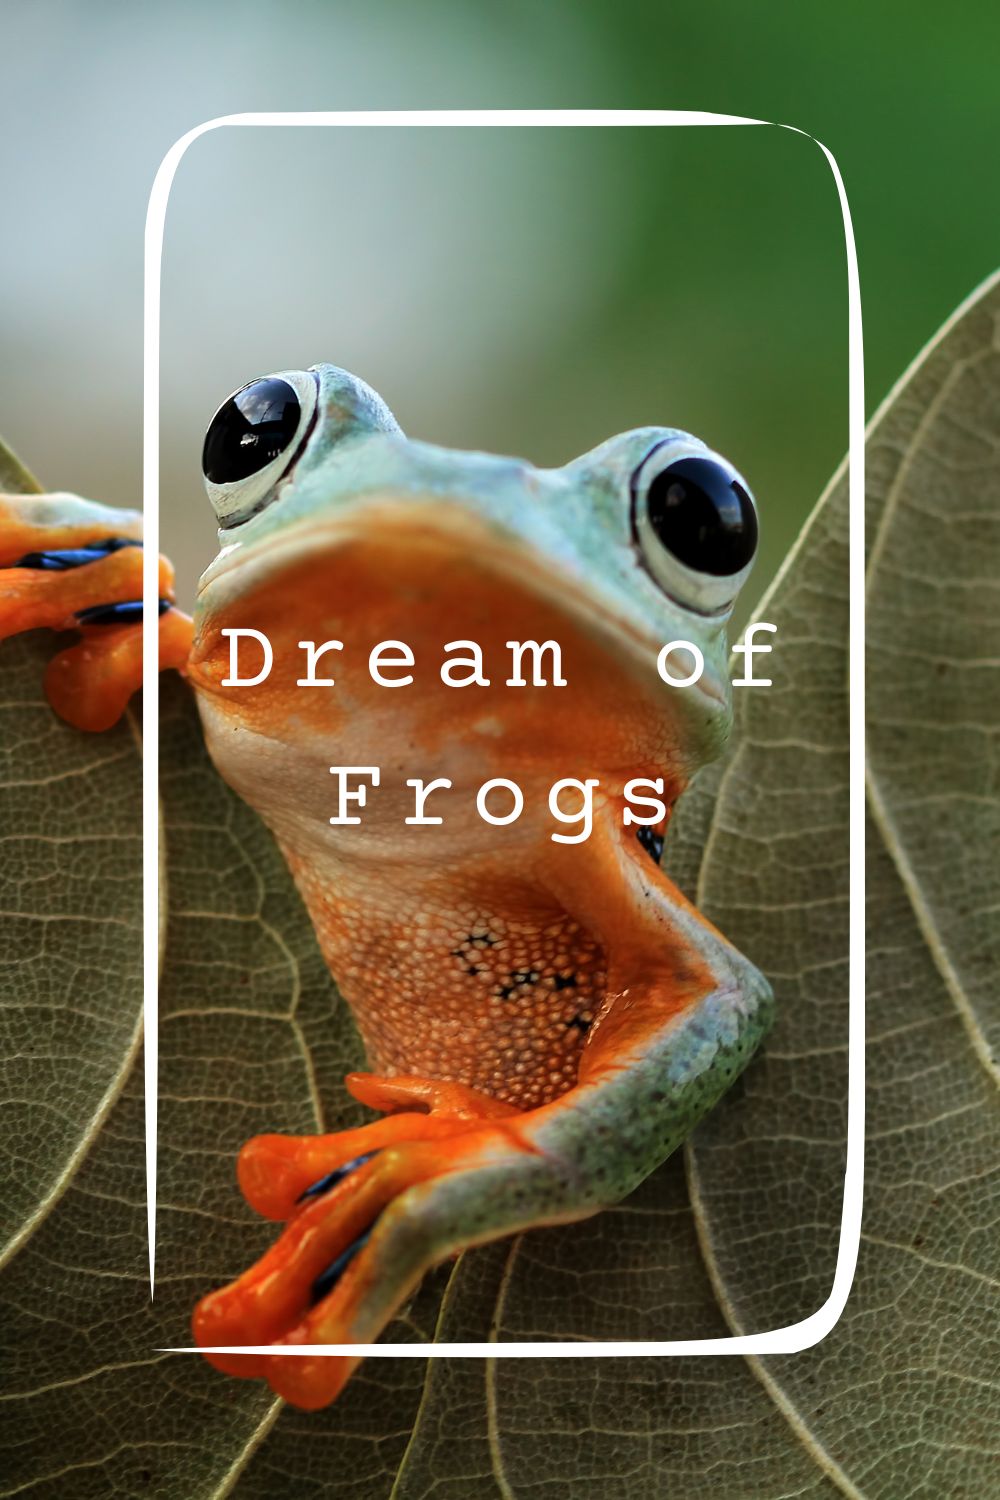 8 Dream of Frogs Meanings4